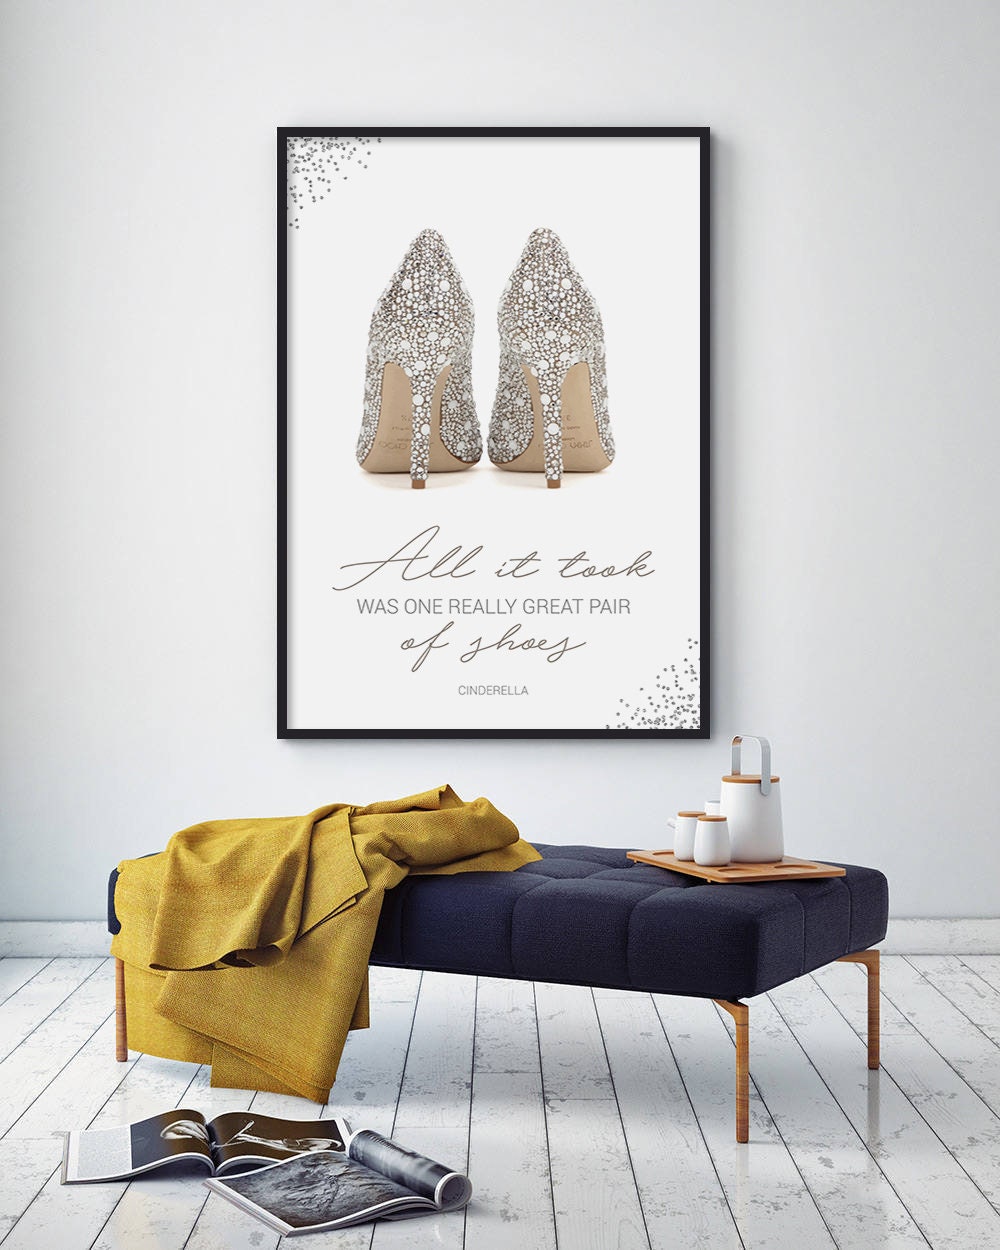 All It Took Was One Really Great Pair of Shoes Cinderella - Etsy